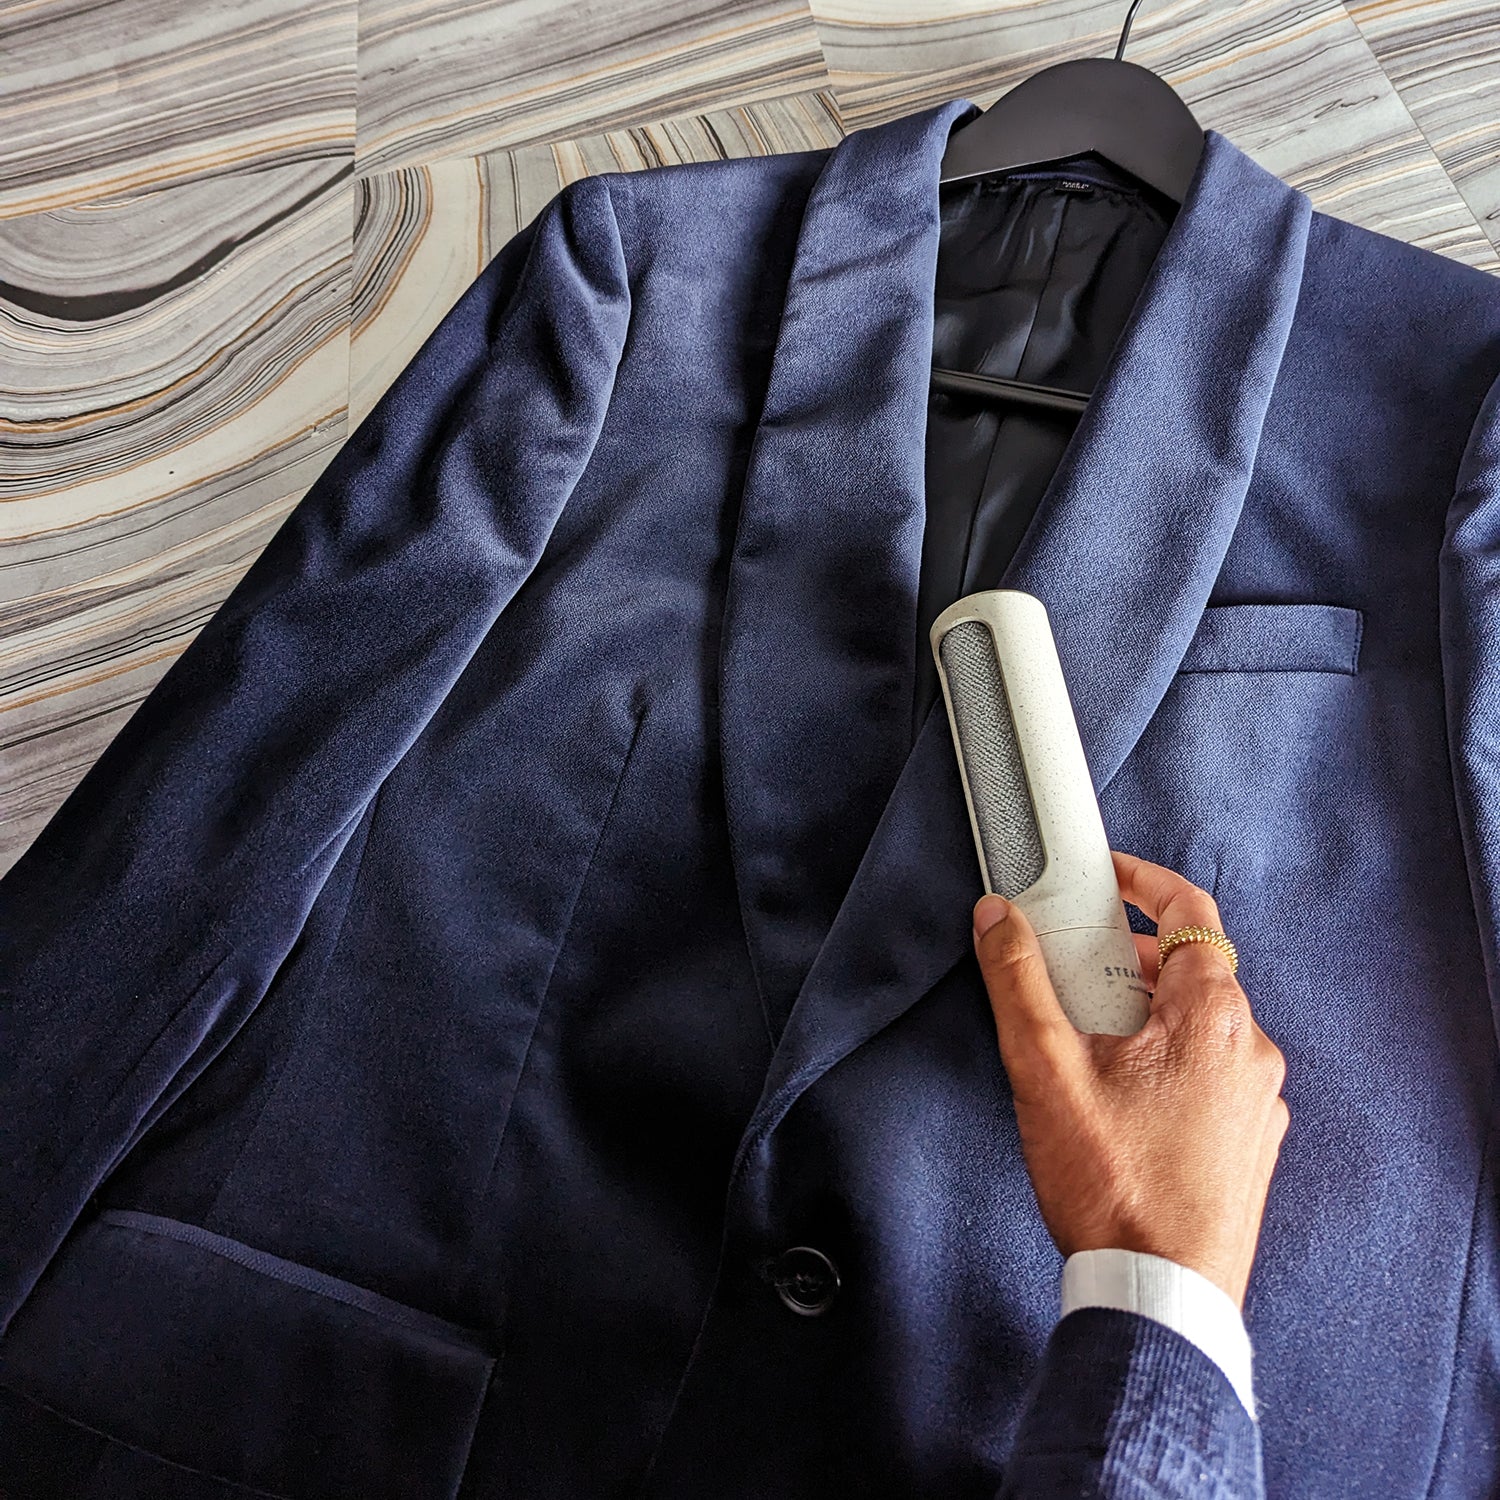 A hand holds up a sleek lint removing tool up to a navy blue velvet suit jacket